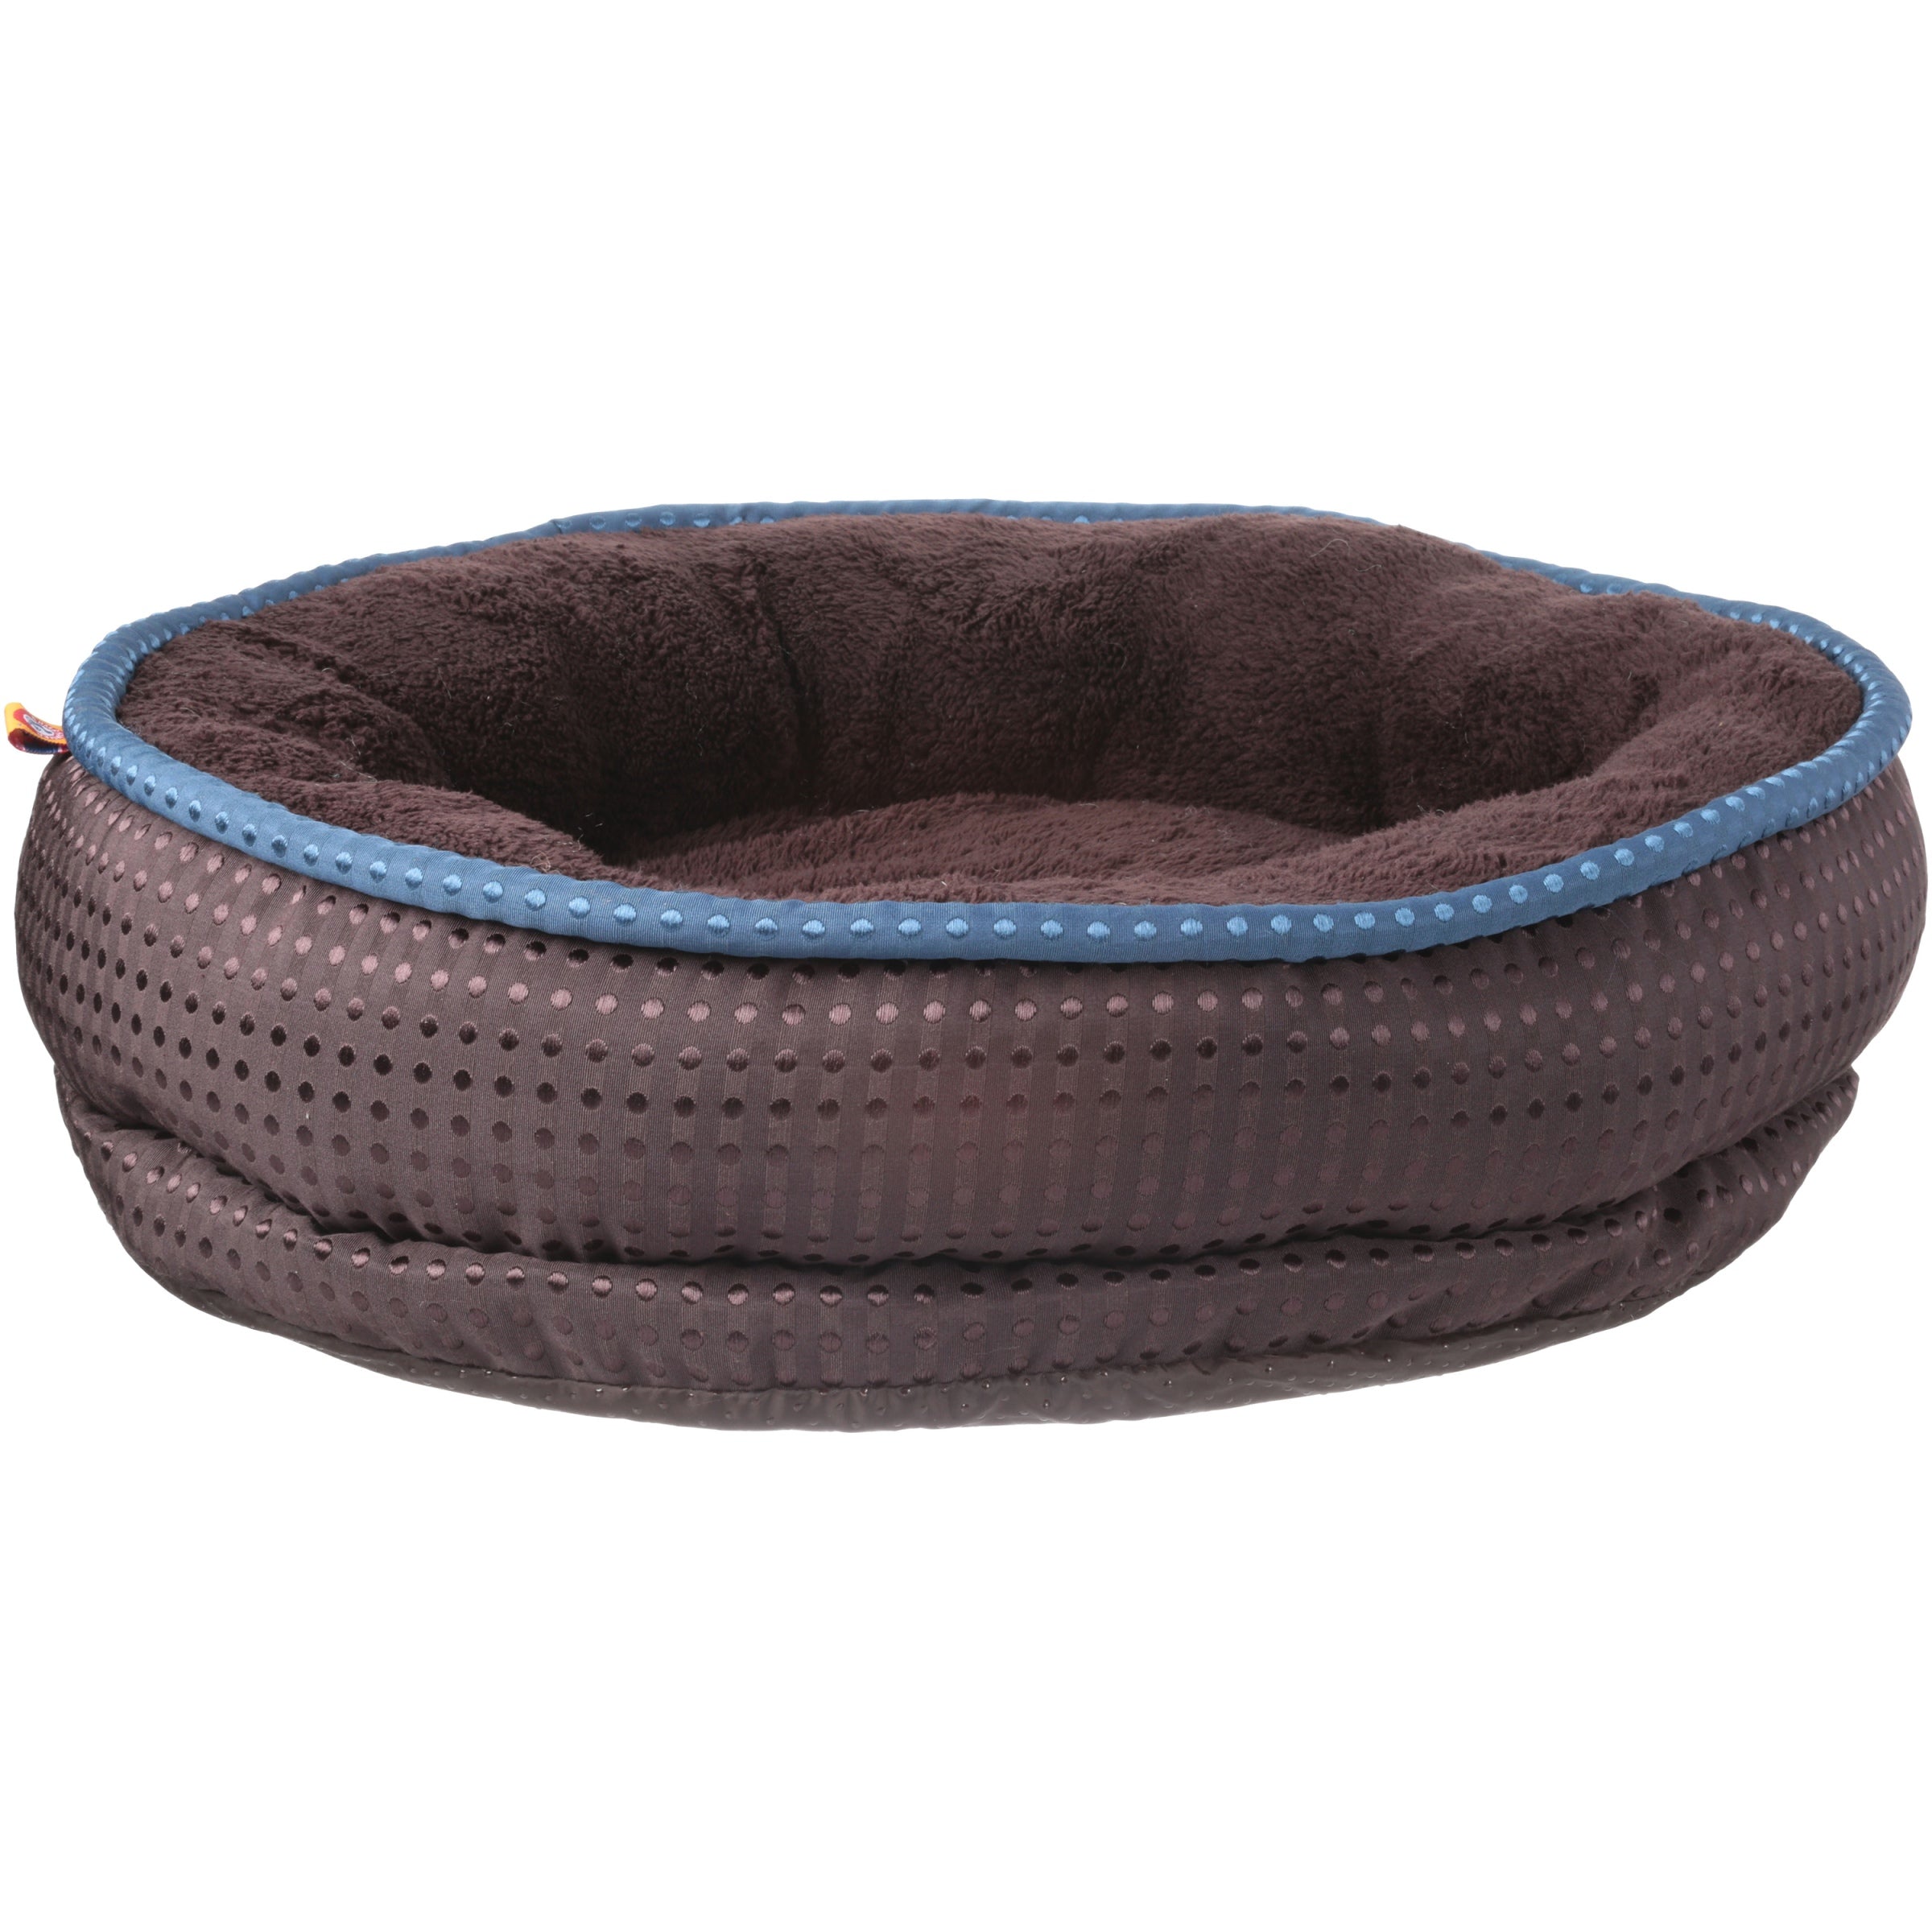 Arm and Hammer Structured Round Dog Bed， Assorted Colors， 20